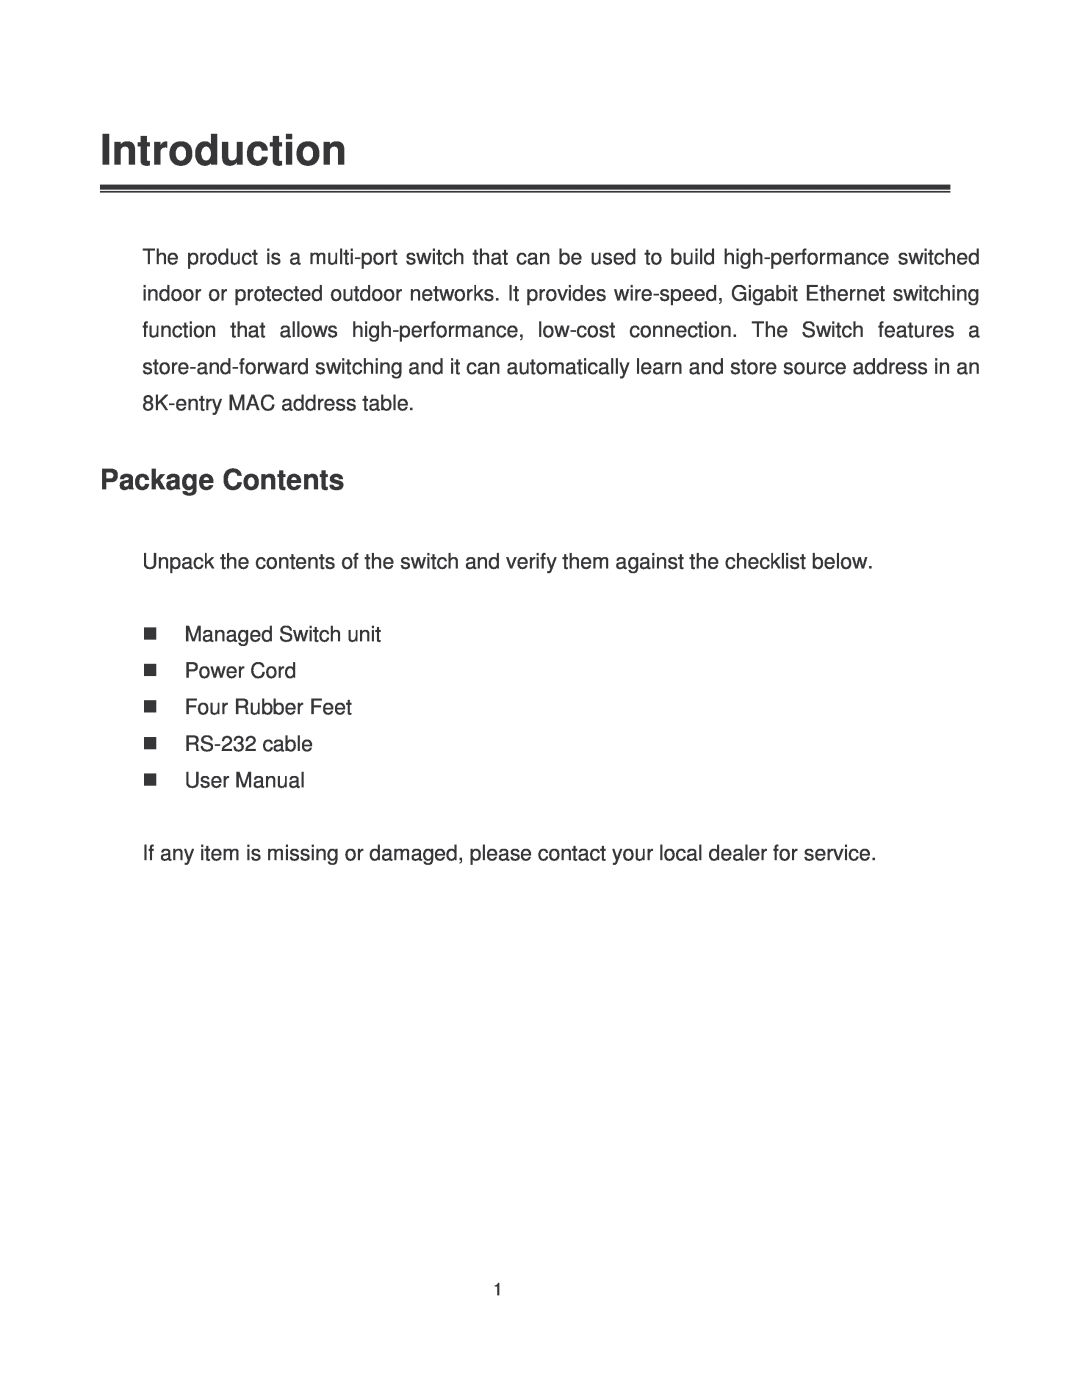 Transition Networks MIL-SM8002TG manual Introduction, Package Contents 